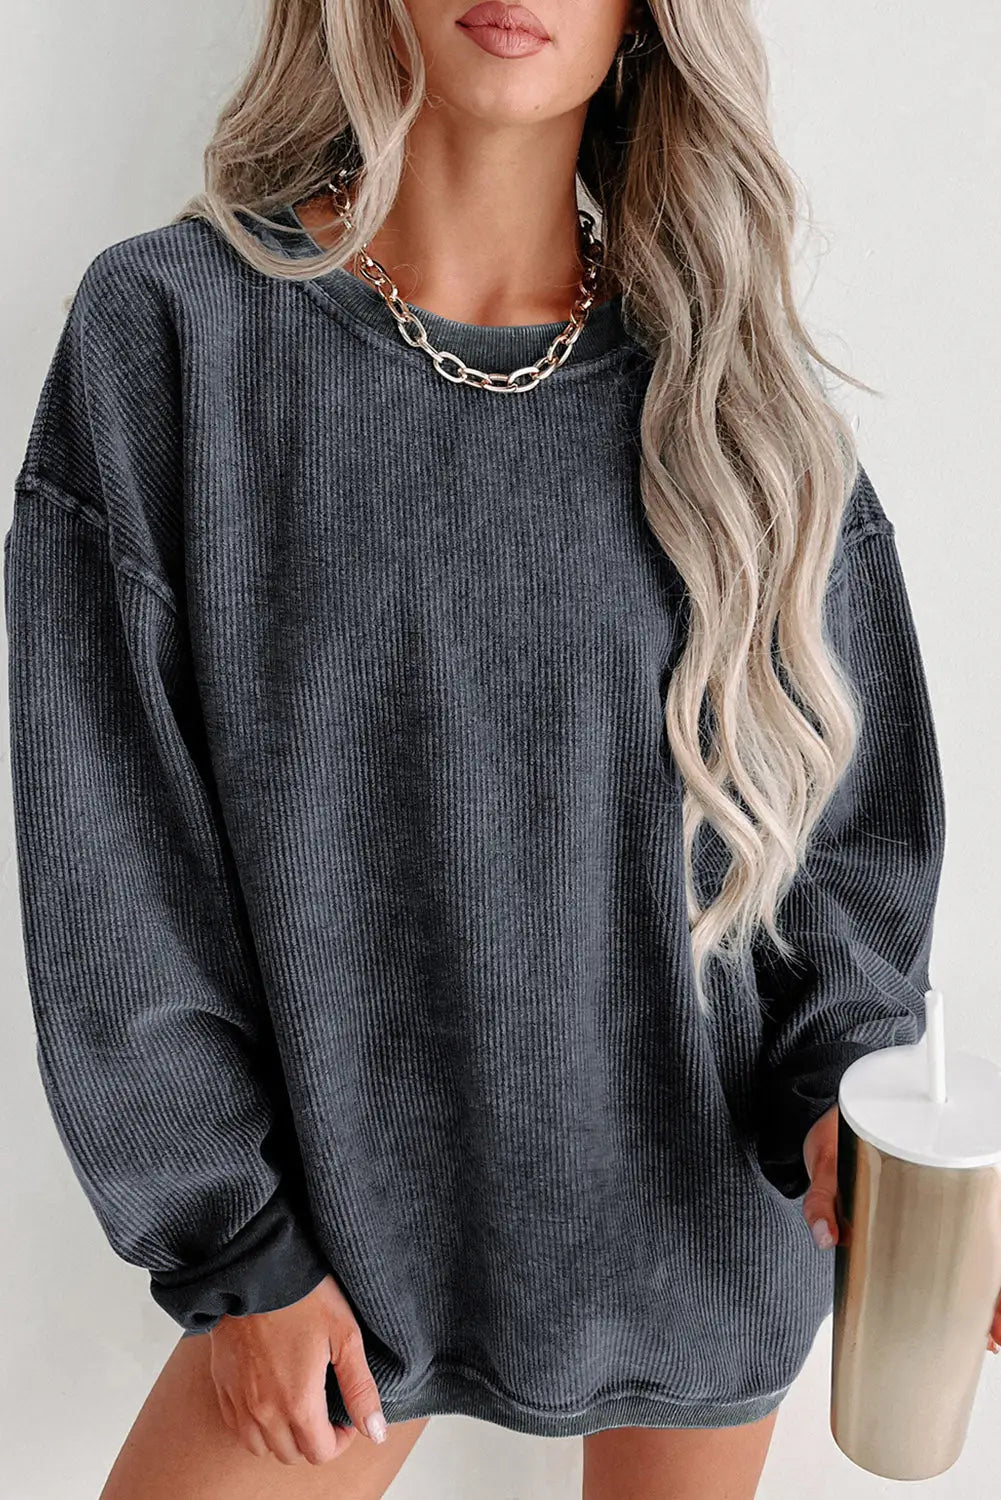 Gray solid ribbed knit round neck pullover sweatshirt - s / 100% polyester - tops